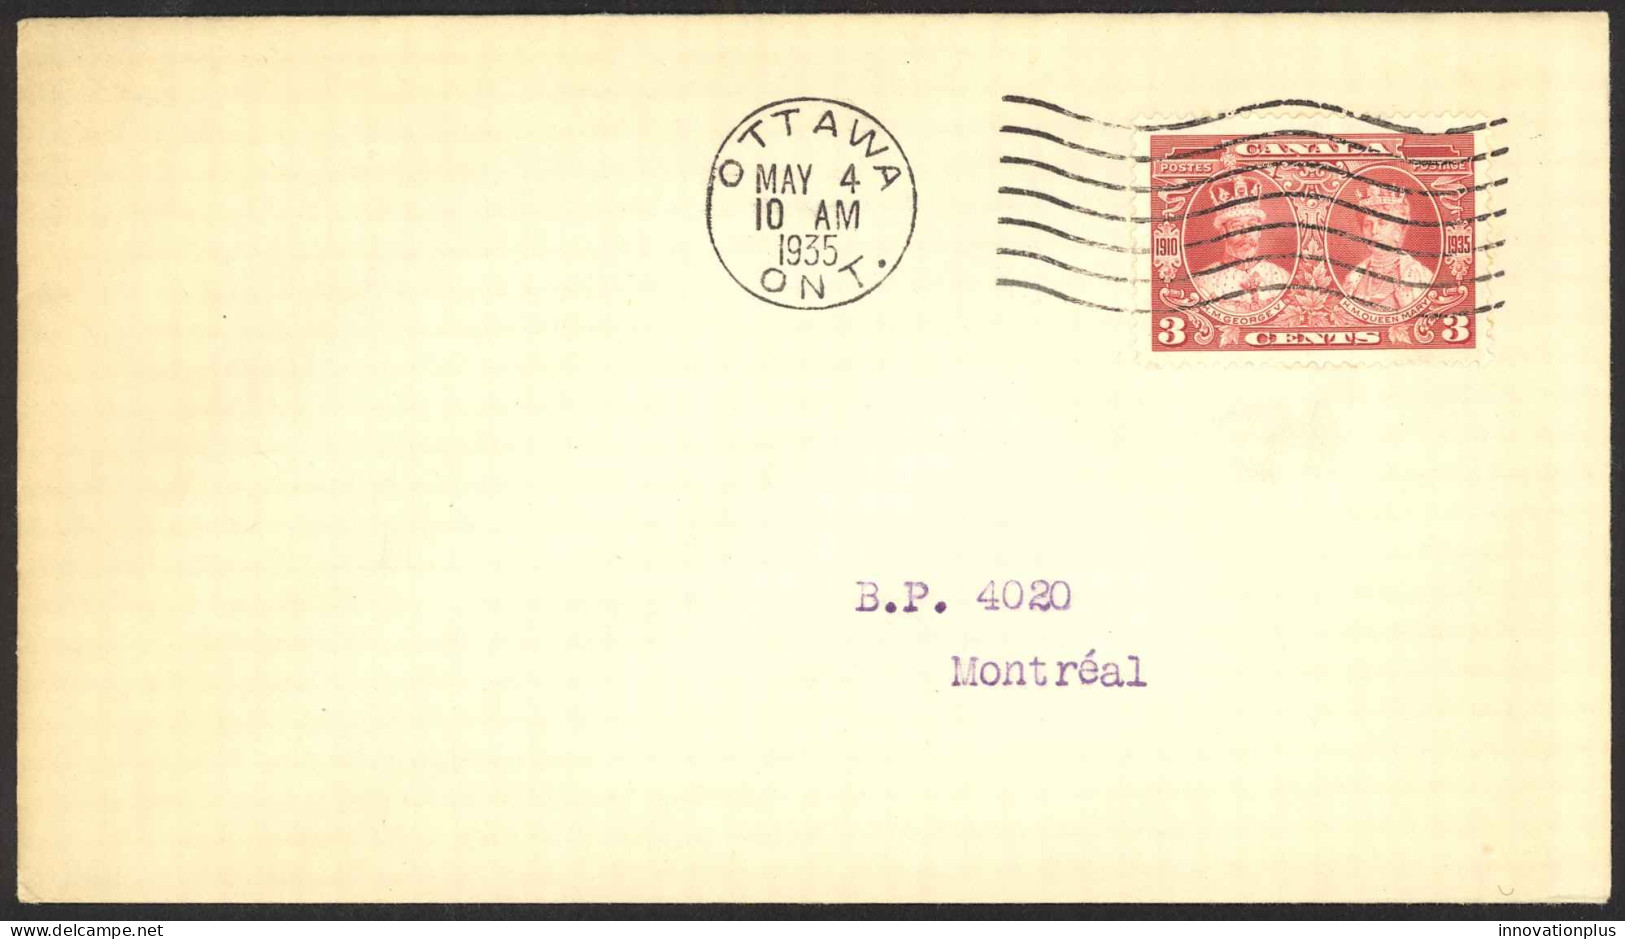 Canada Sc# 213 FDC (a) 1935 5.4 King George V Silver Jubilee - ....-1951